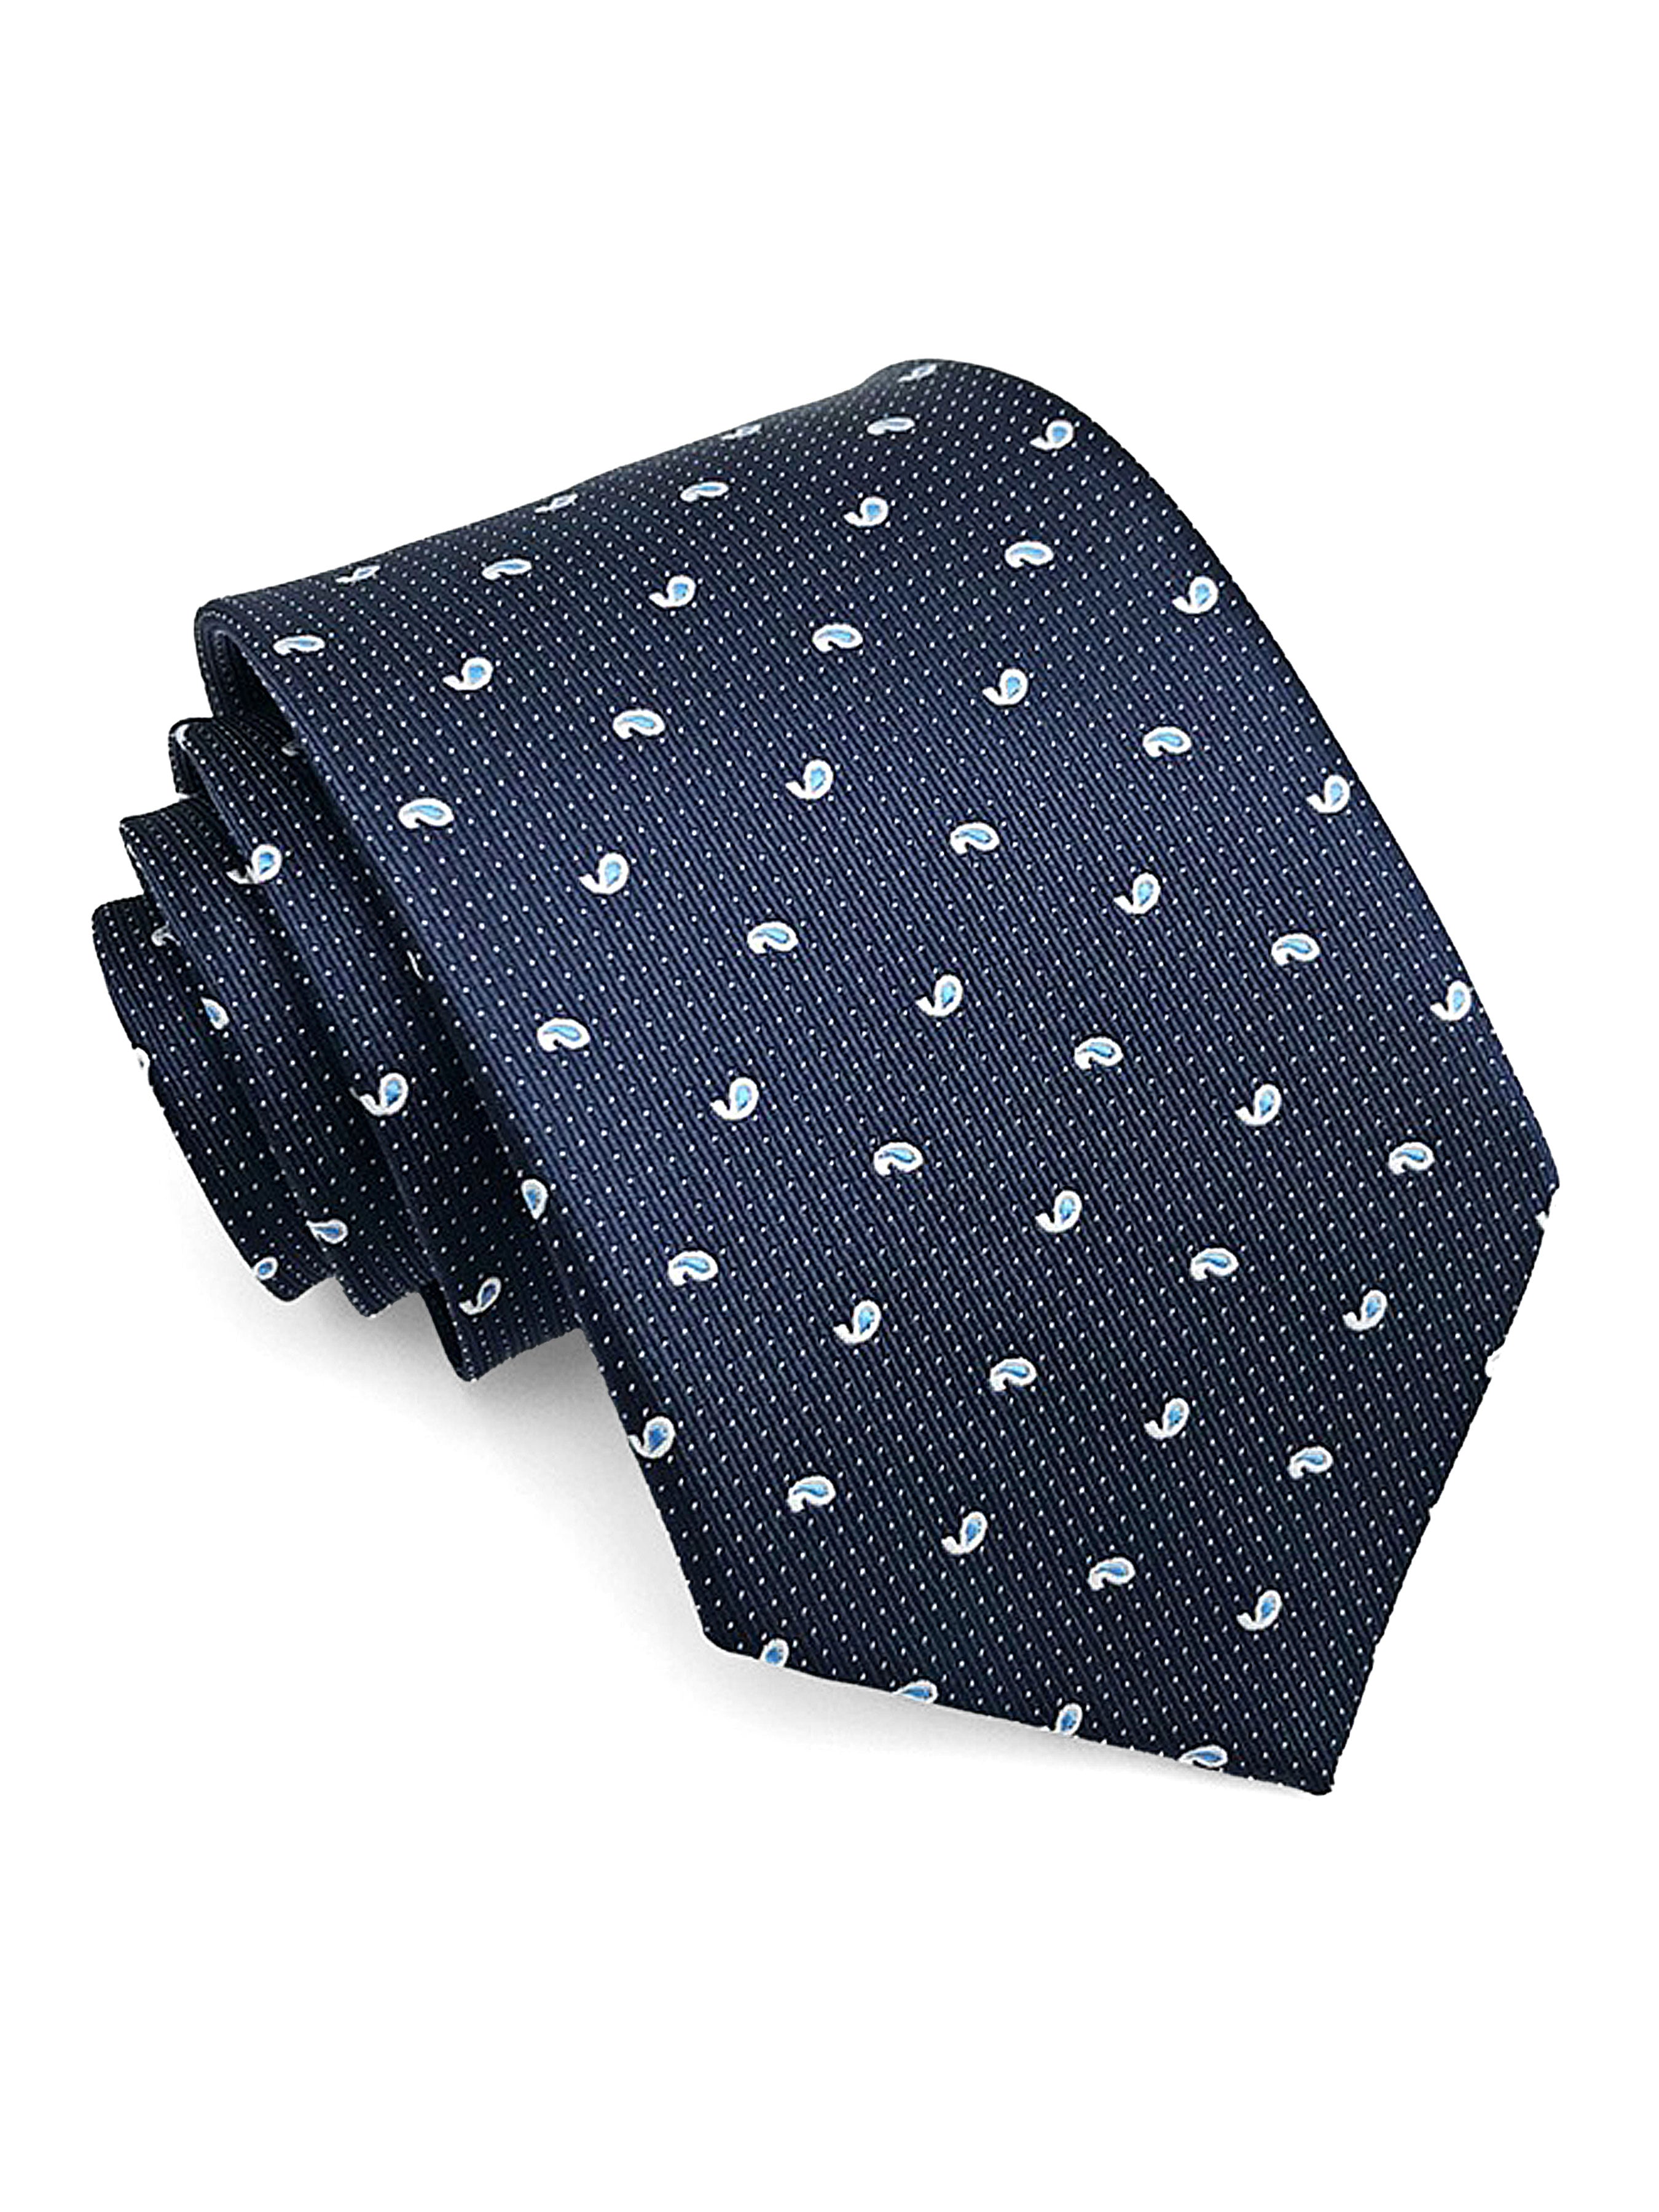 Budding Paisley Tie - Navy Blue with White Dot - Zeve Shoes